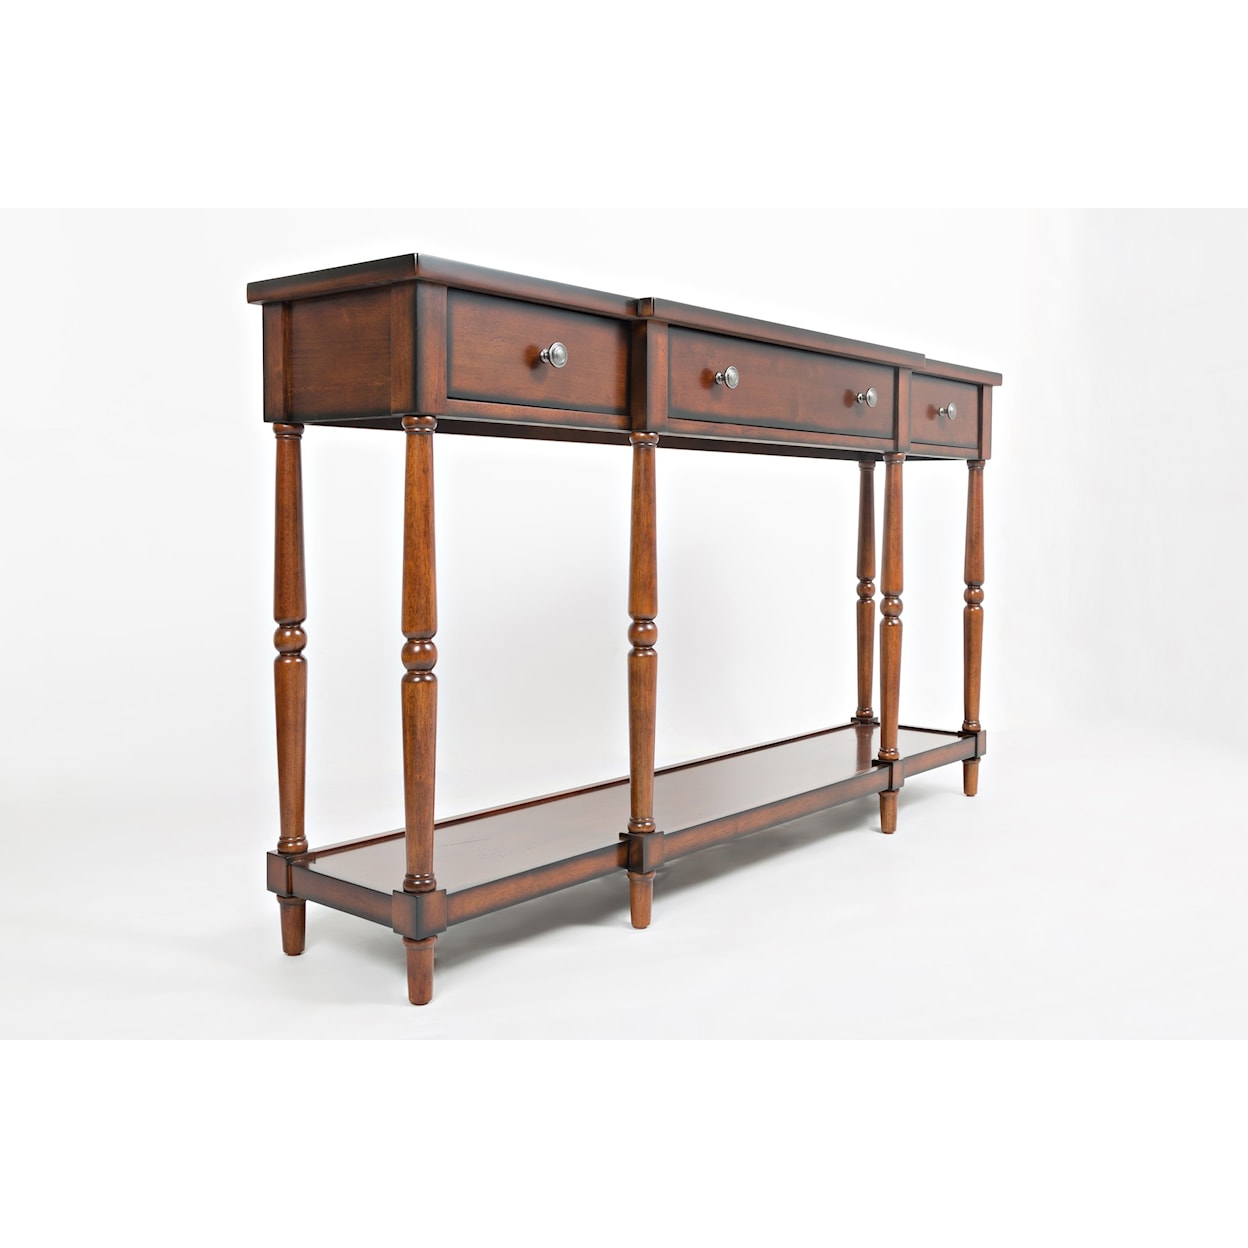 Belfort Essentials Stately Home 60" Console